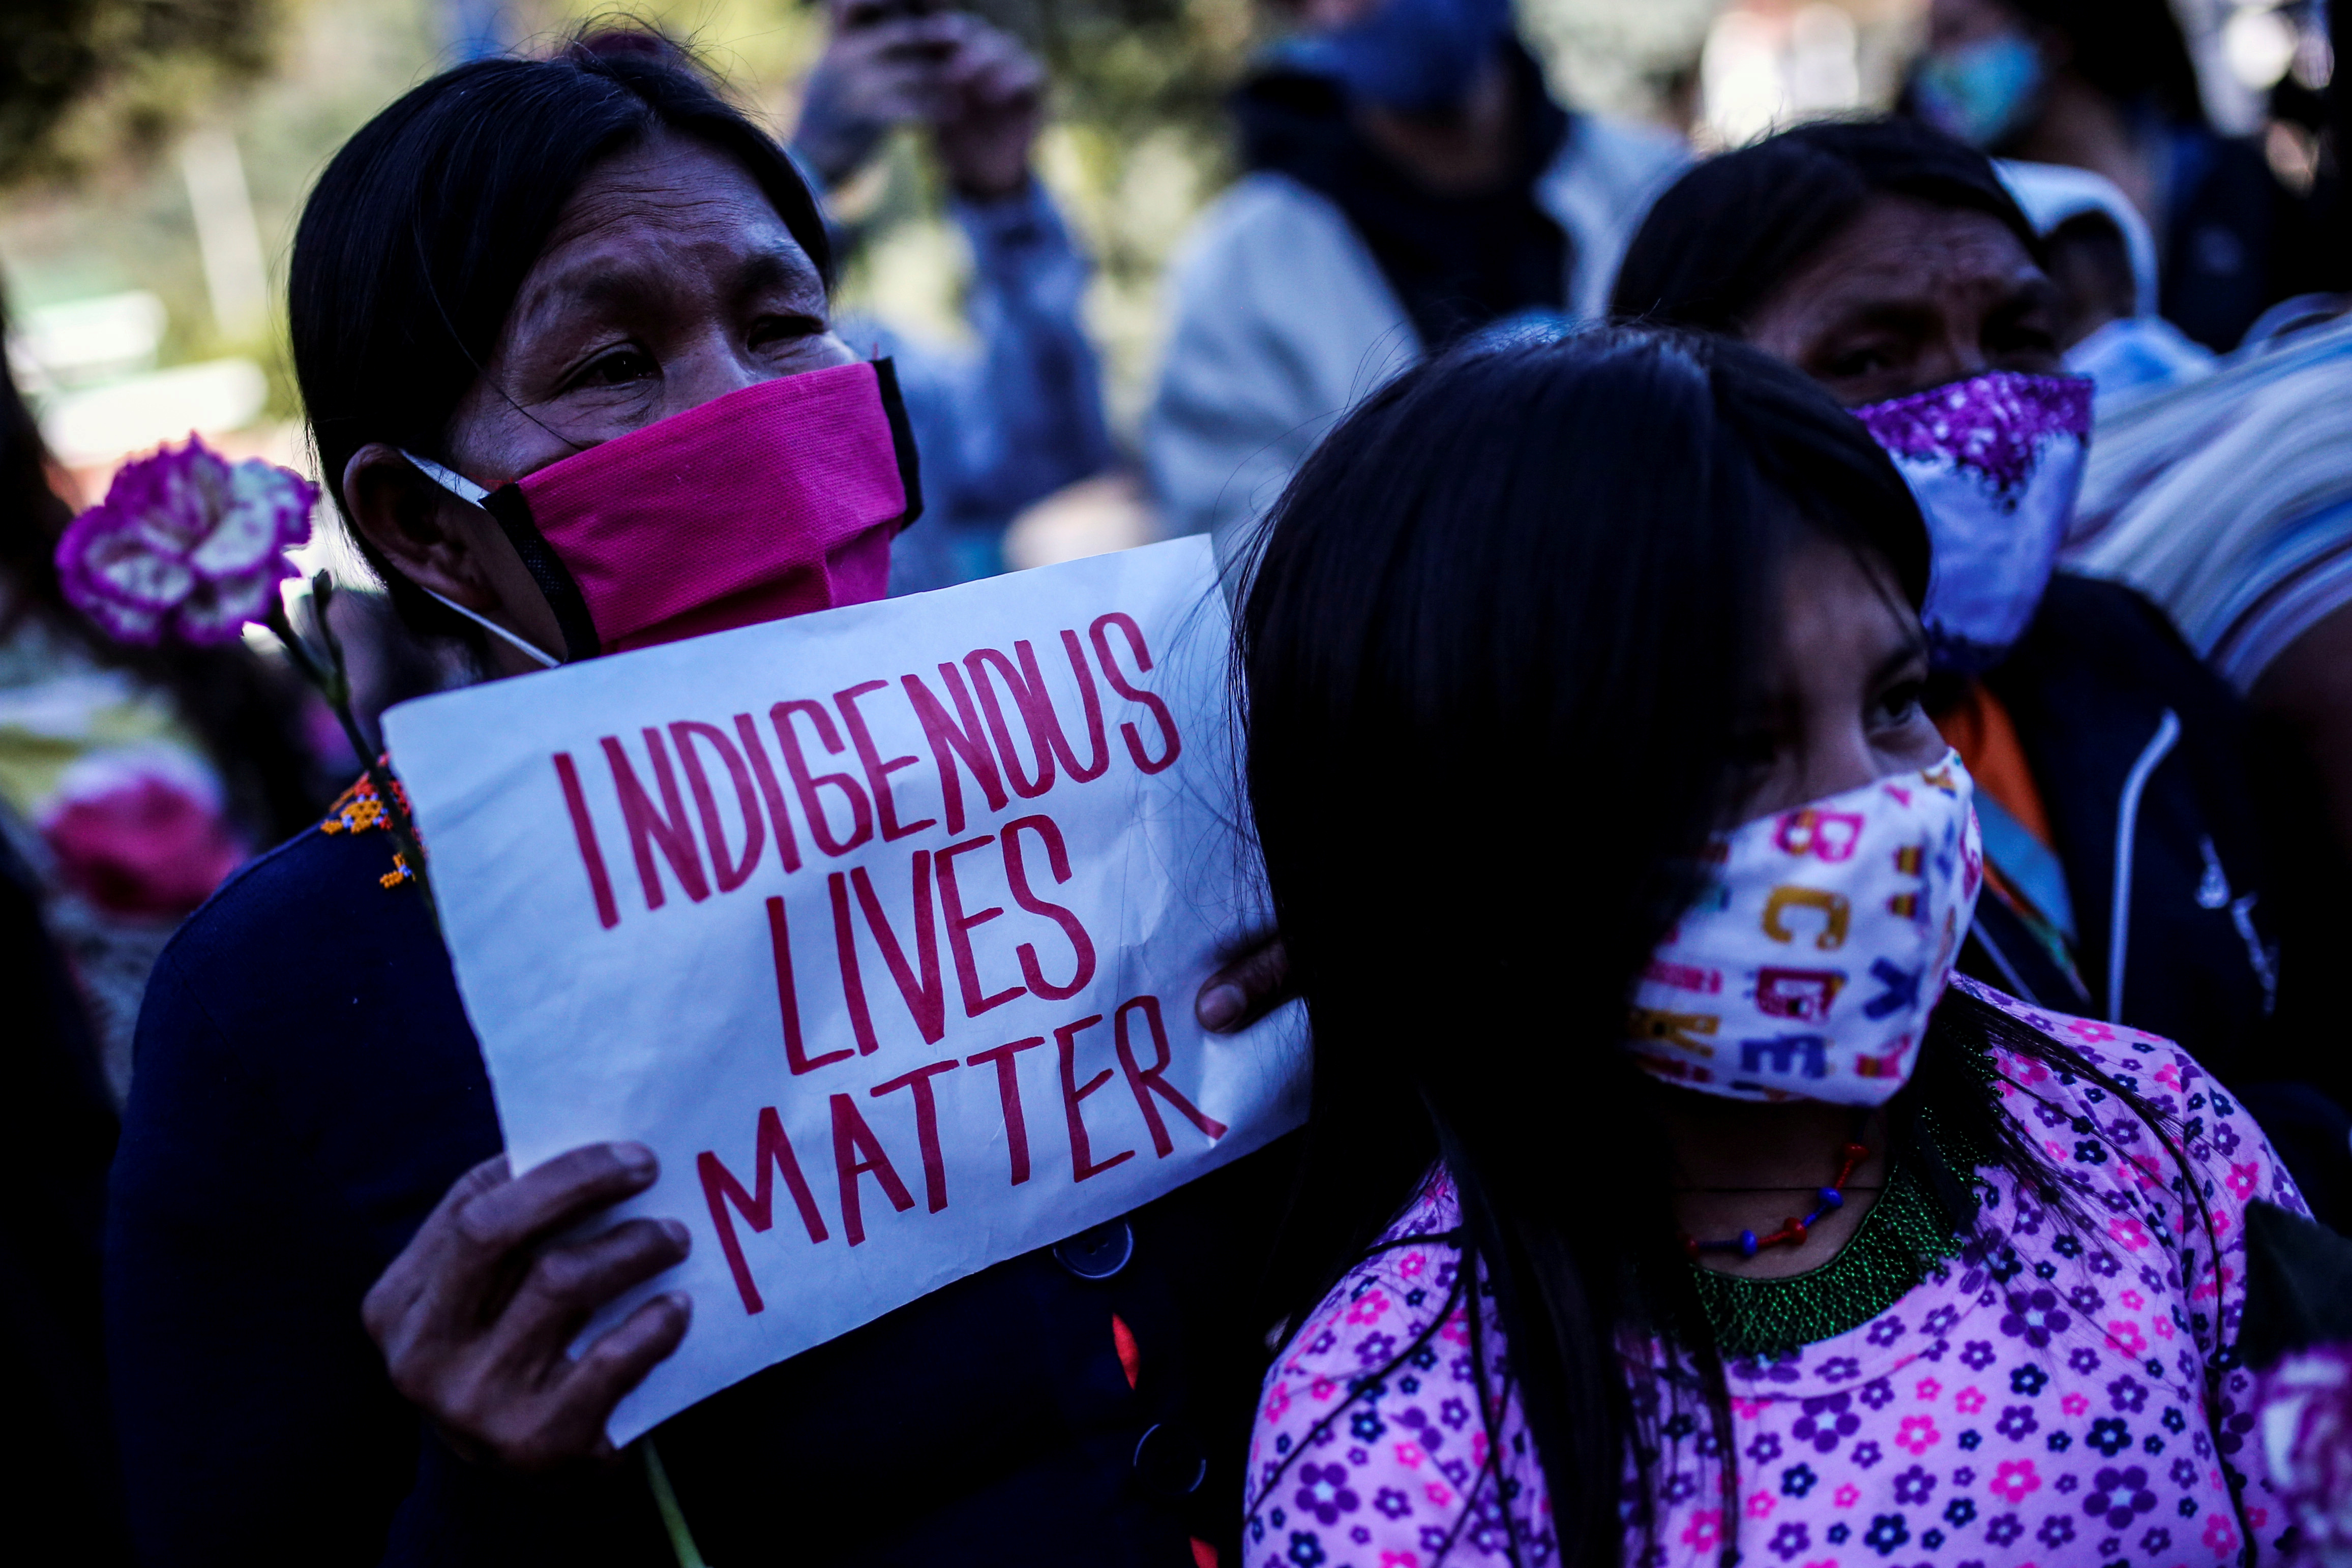 FILE PHOTO: Demonstrators wearing face masks protest in front of a military battalion, against the reported rape of an Embera Chami indigenous girl by soldiers, in Bogota, Colombia June 29, 2020. REUTERS/Luisa Gonzalez/File Photo